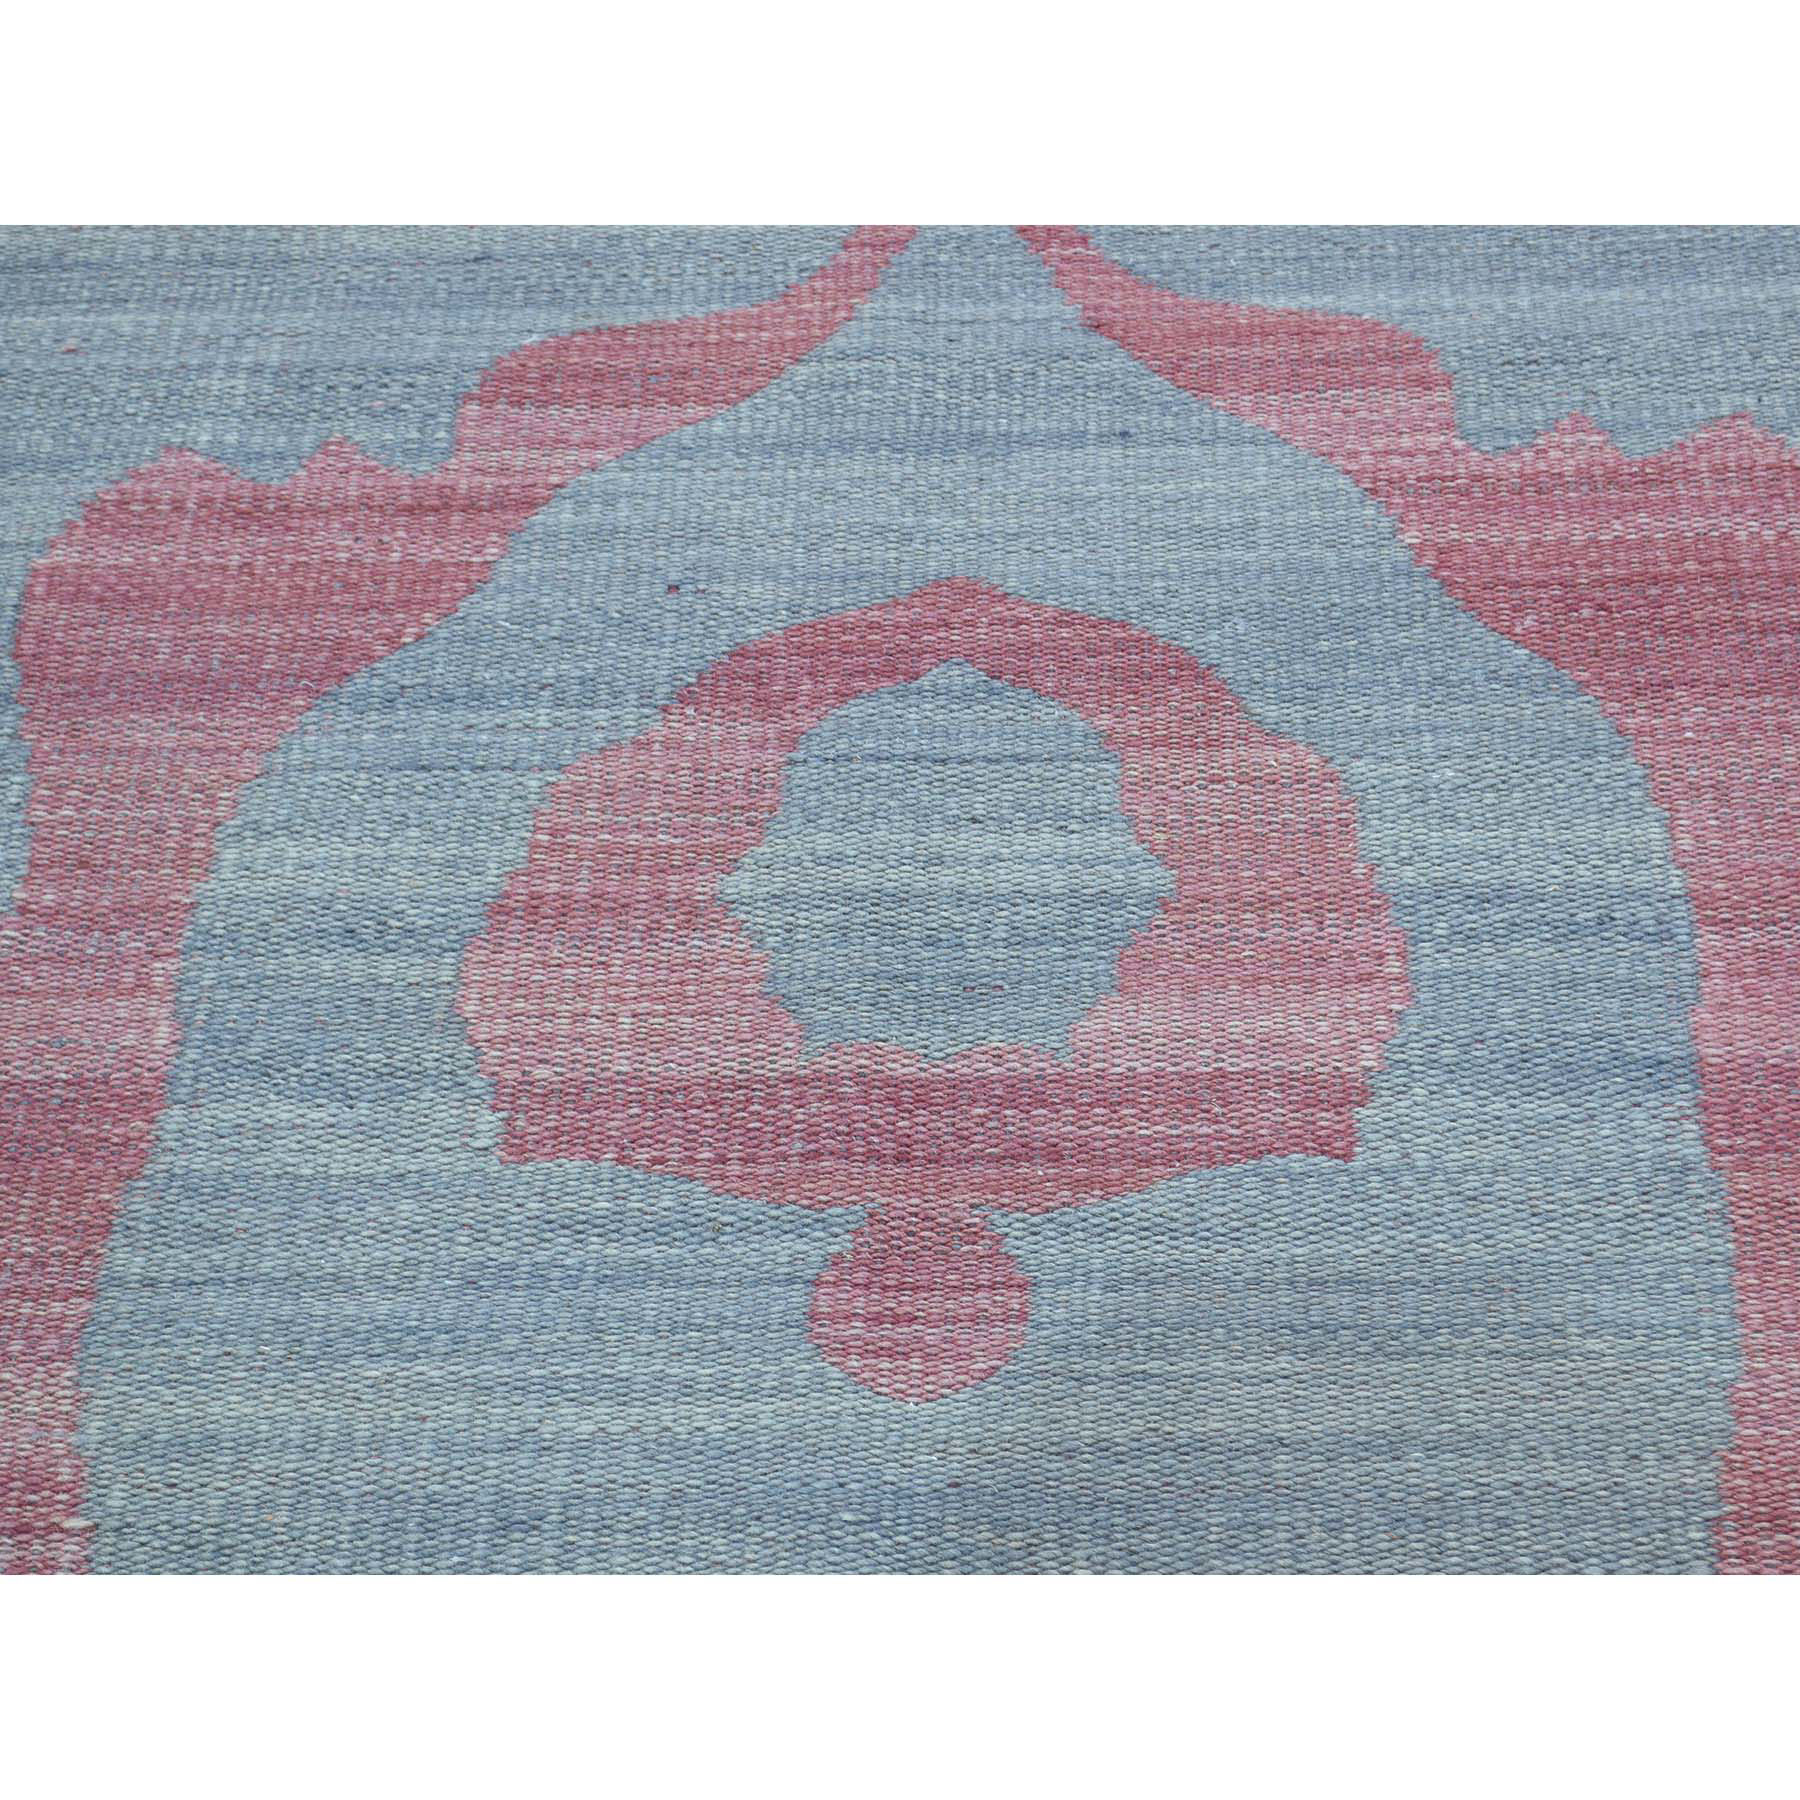 6-x6- Hand Woven Flat Weave Pure Wool Reversible Kilim Square Rug 